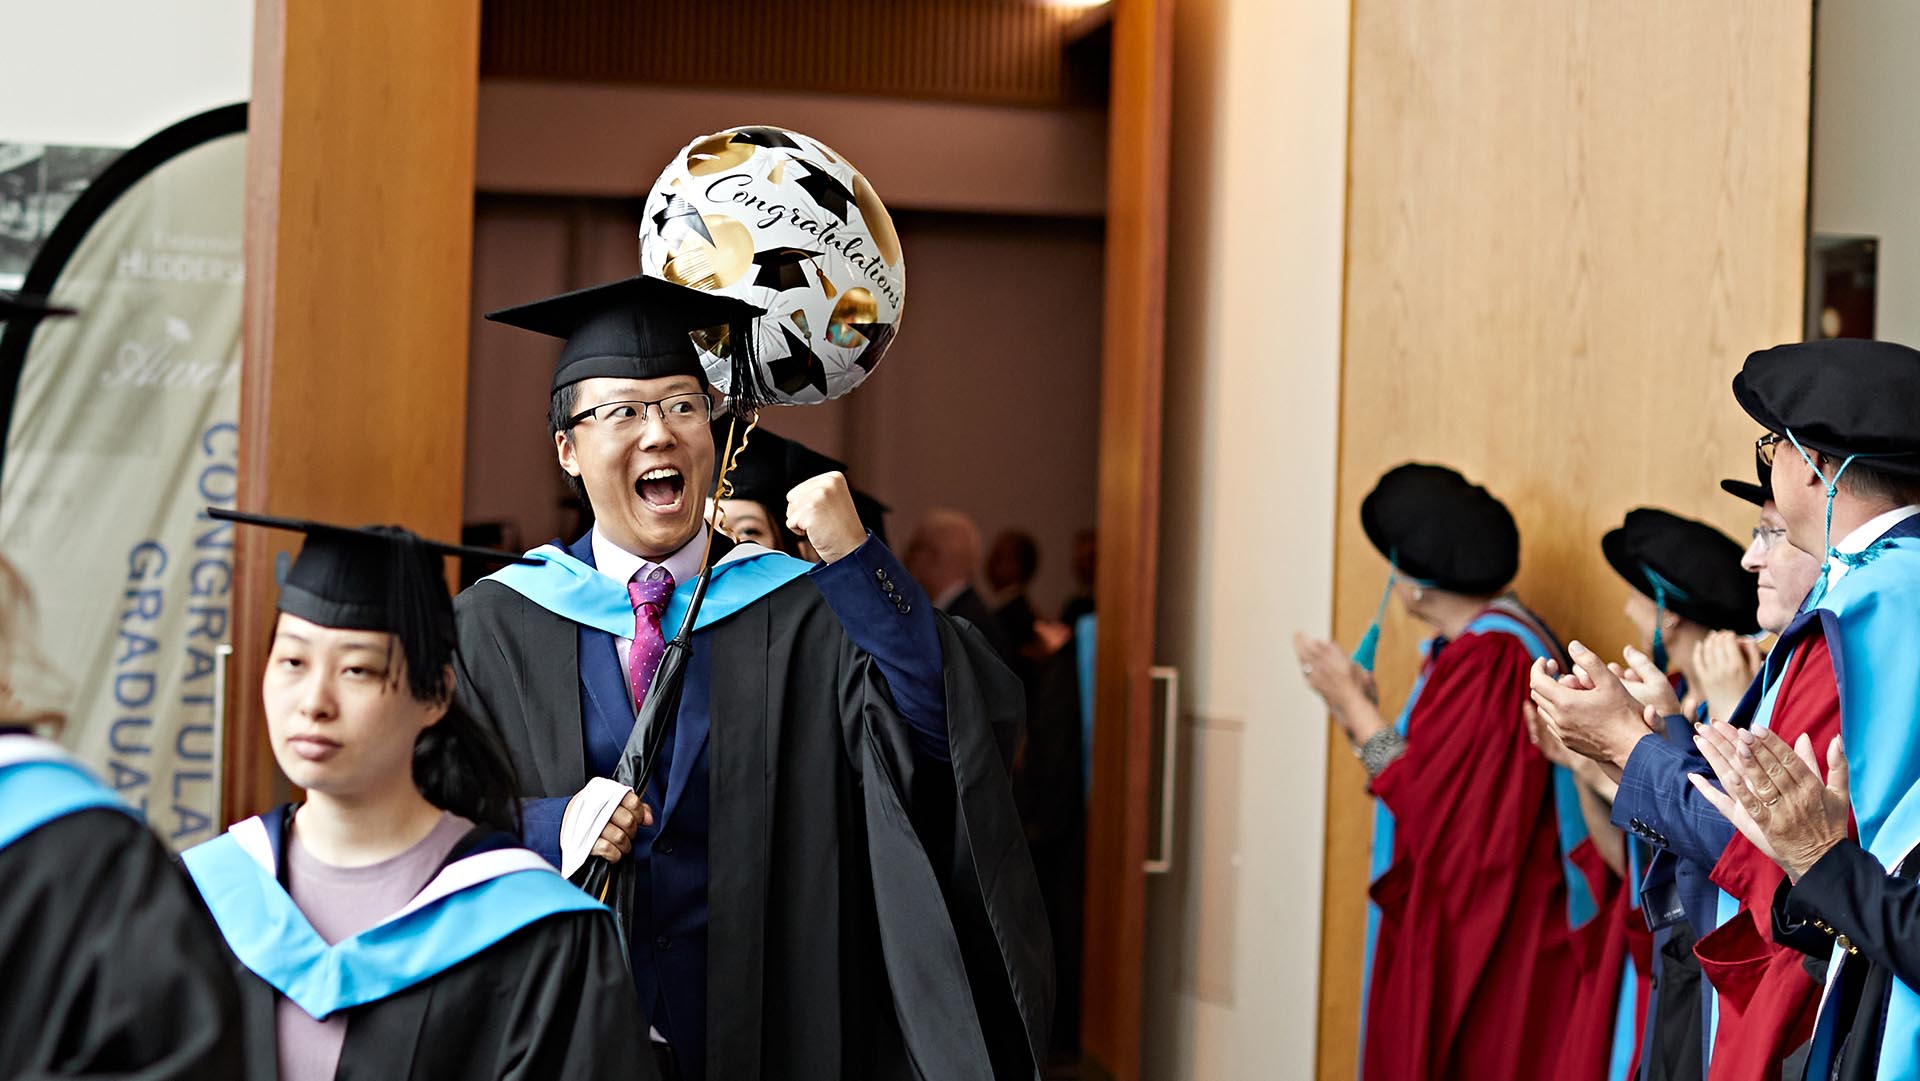 A student celebrates getting his degree by smiling and waving a lot